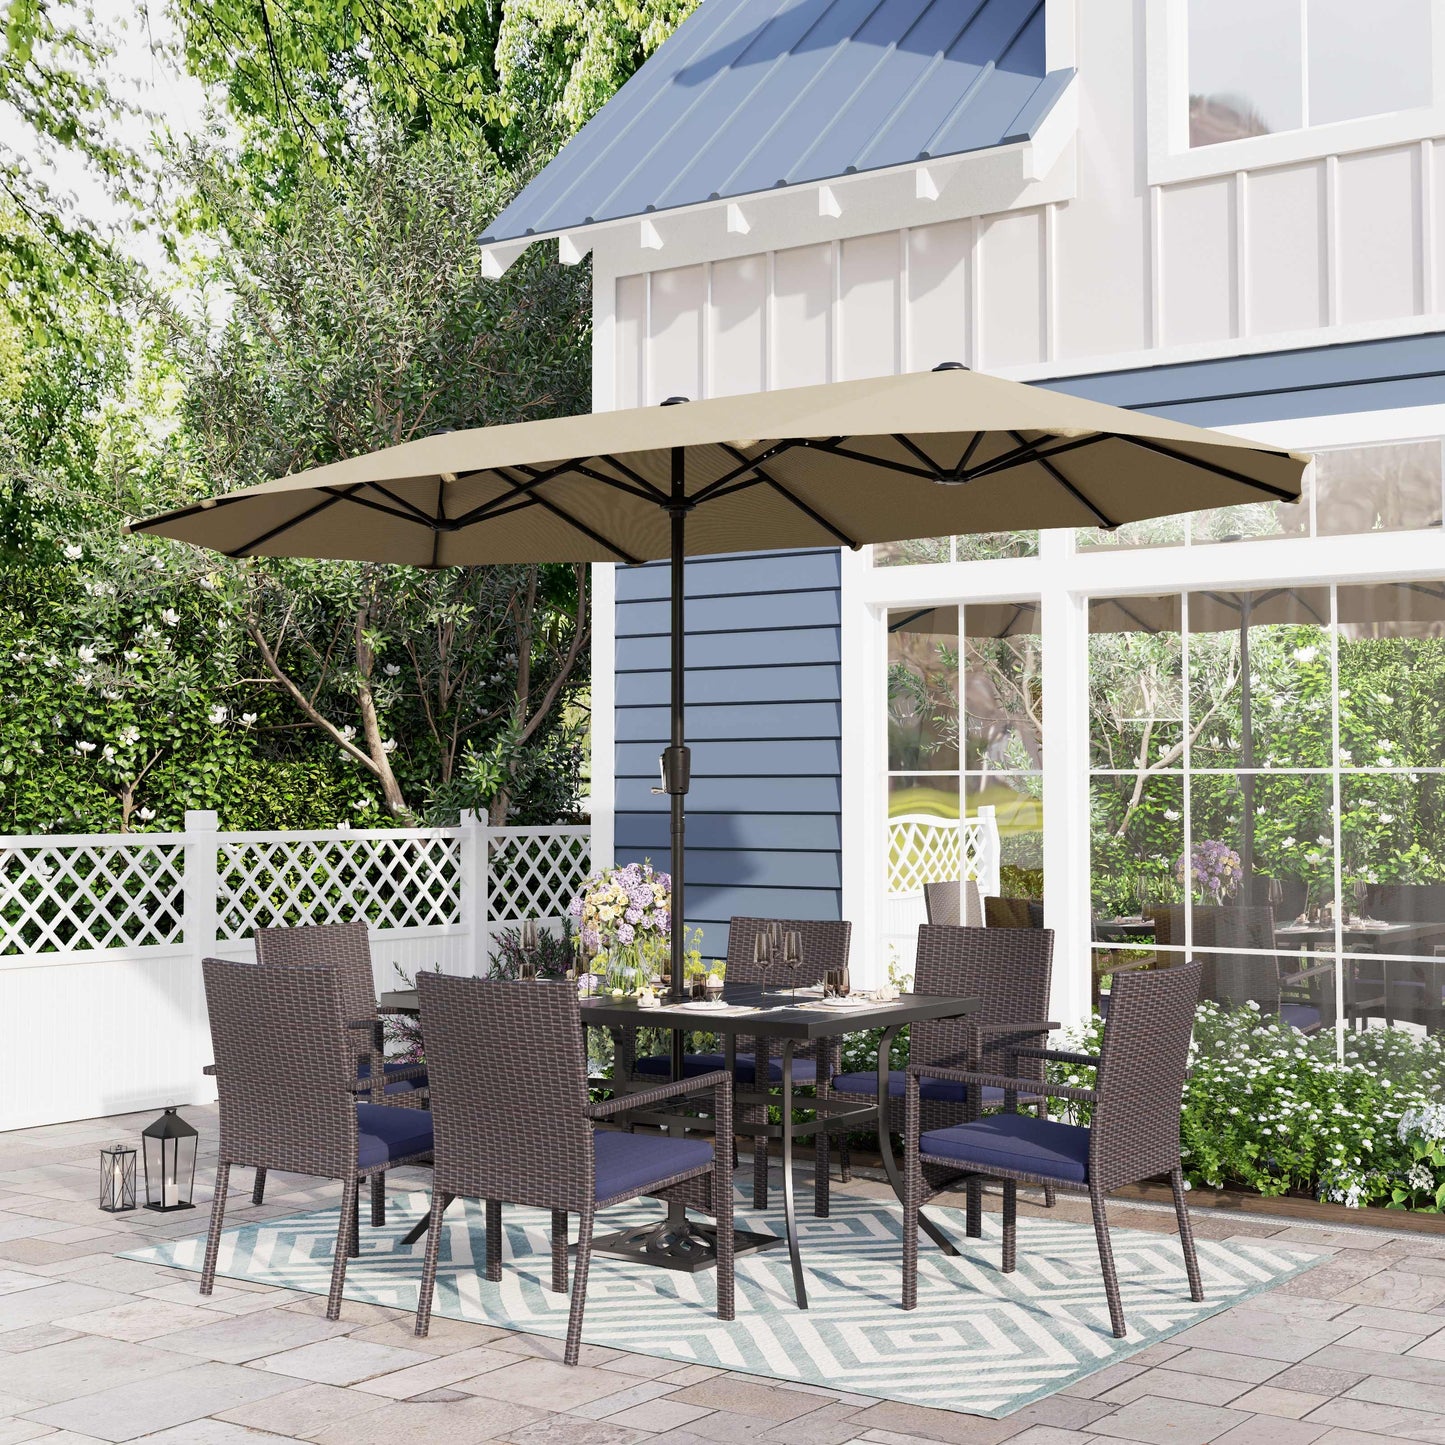 Sophia & William 8-Piece Outdoor Patio Set with 13 ft Beige Umbrella, Rattan Chairs & Rectangle Table for 6